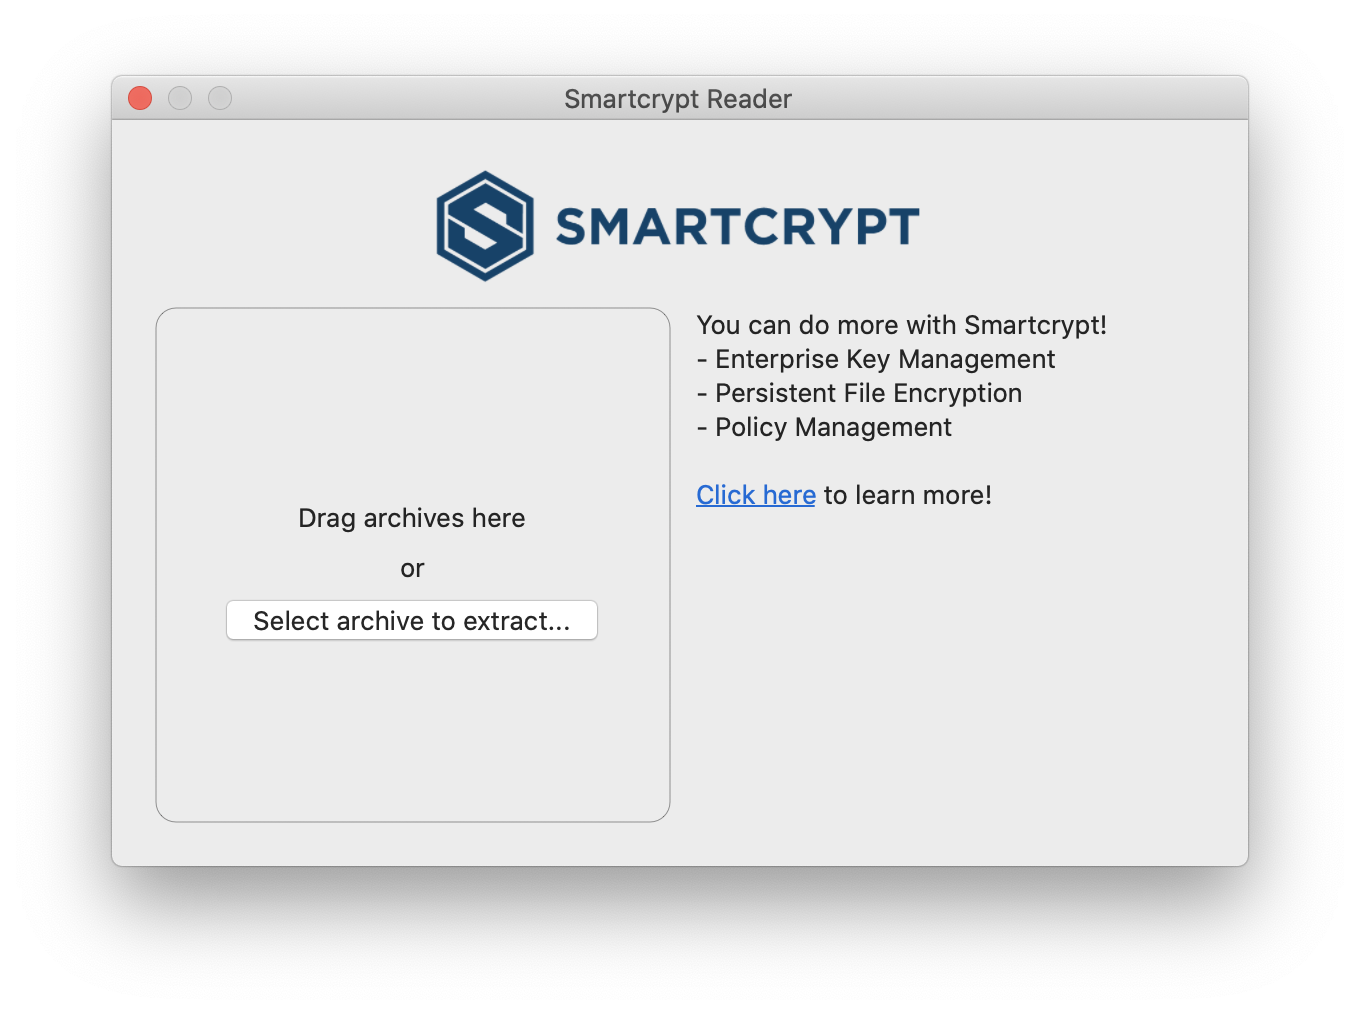 Default smartcrypt reader page is shown